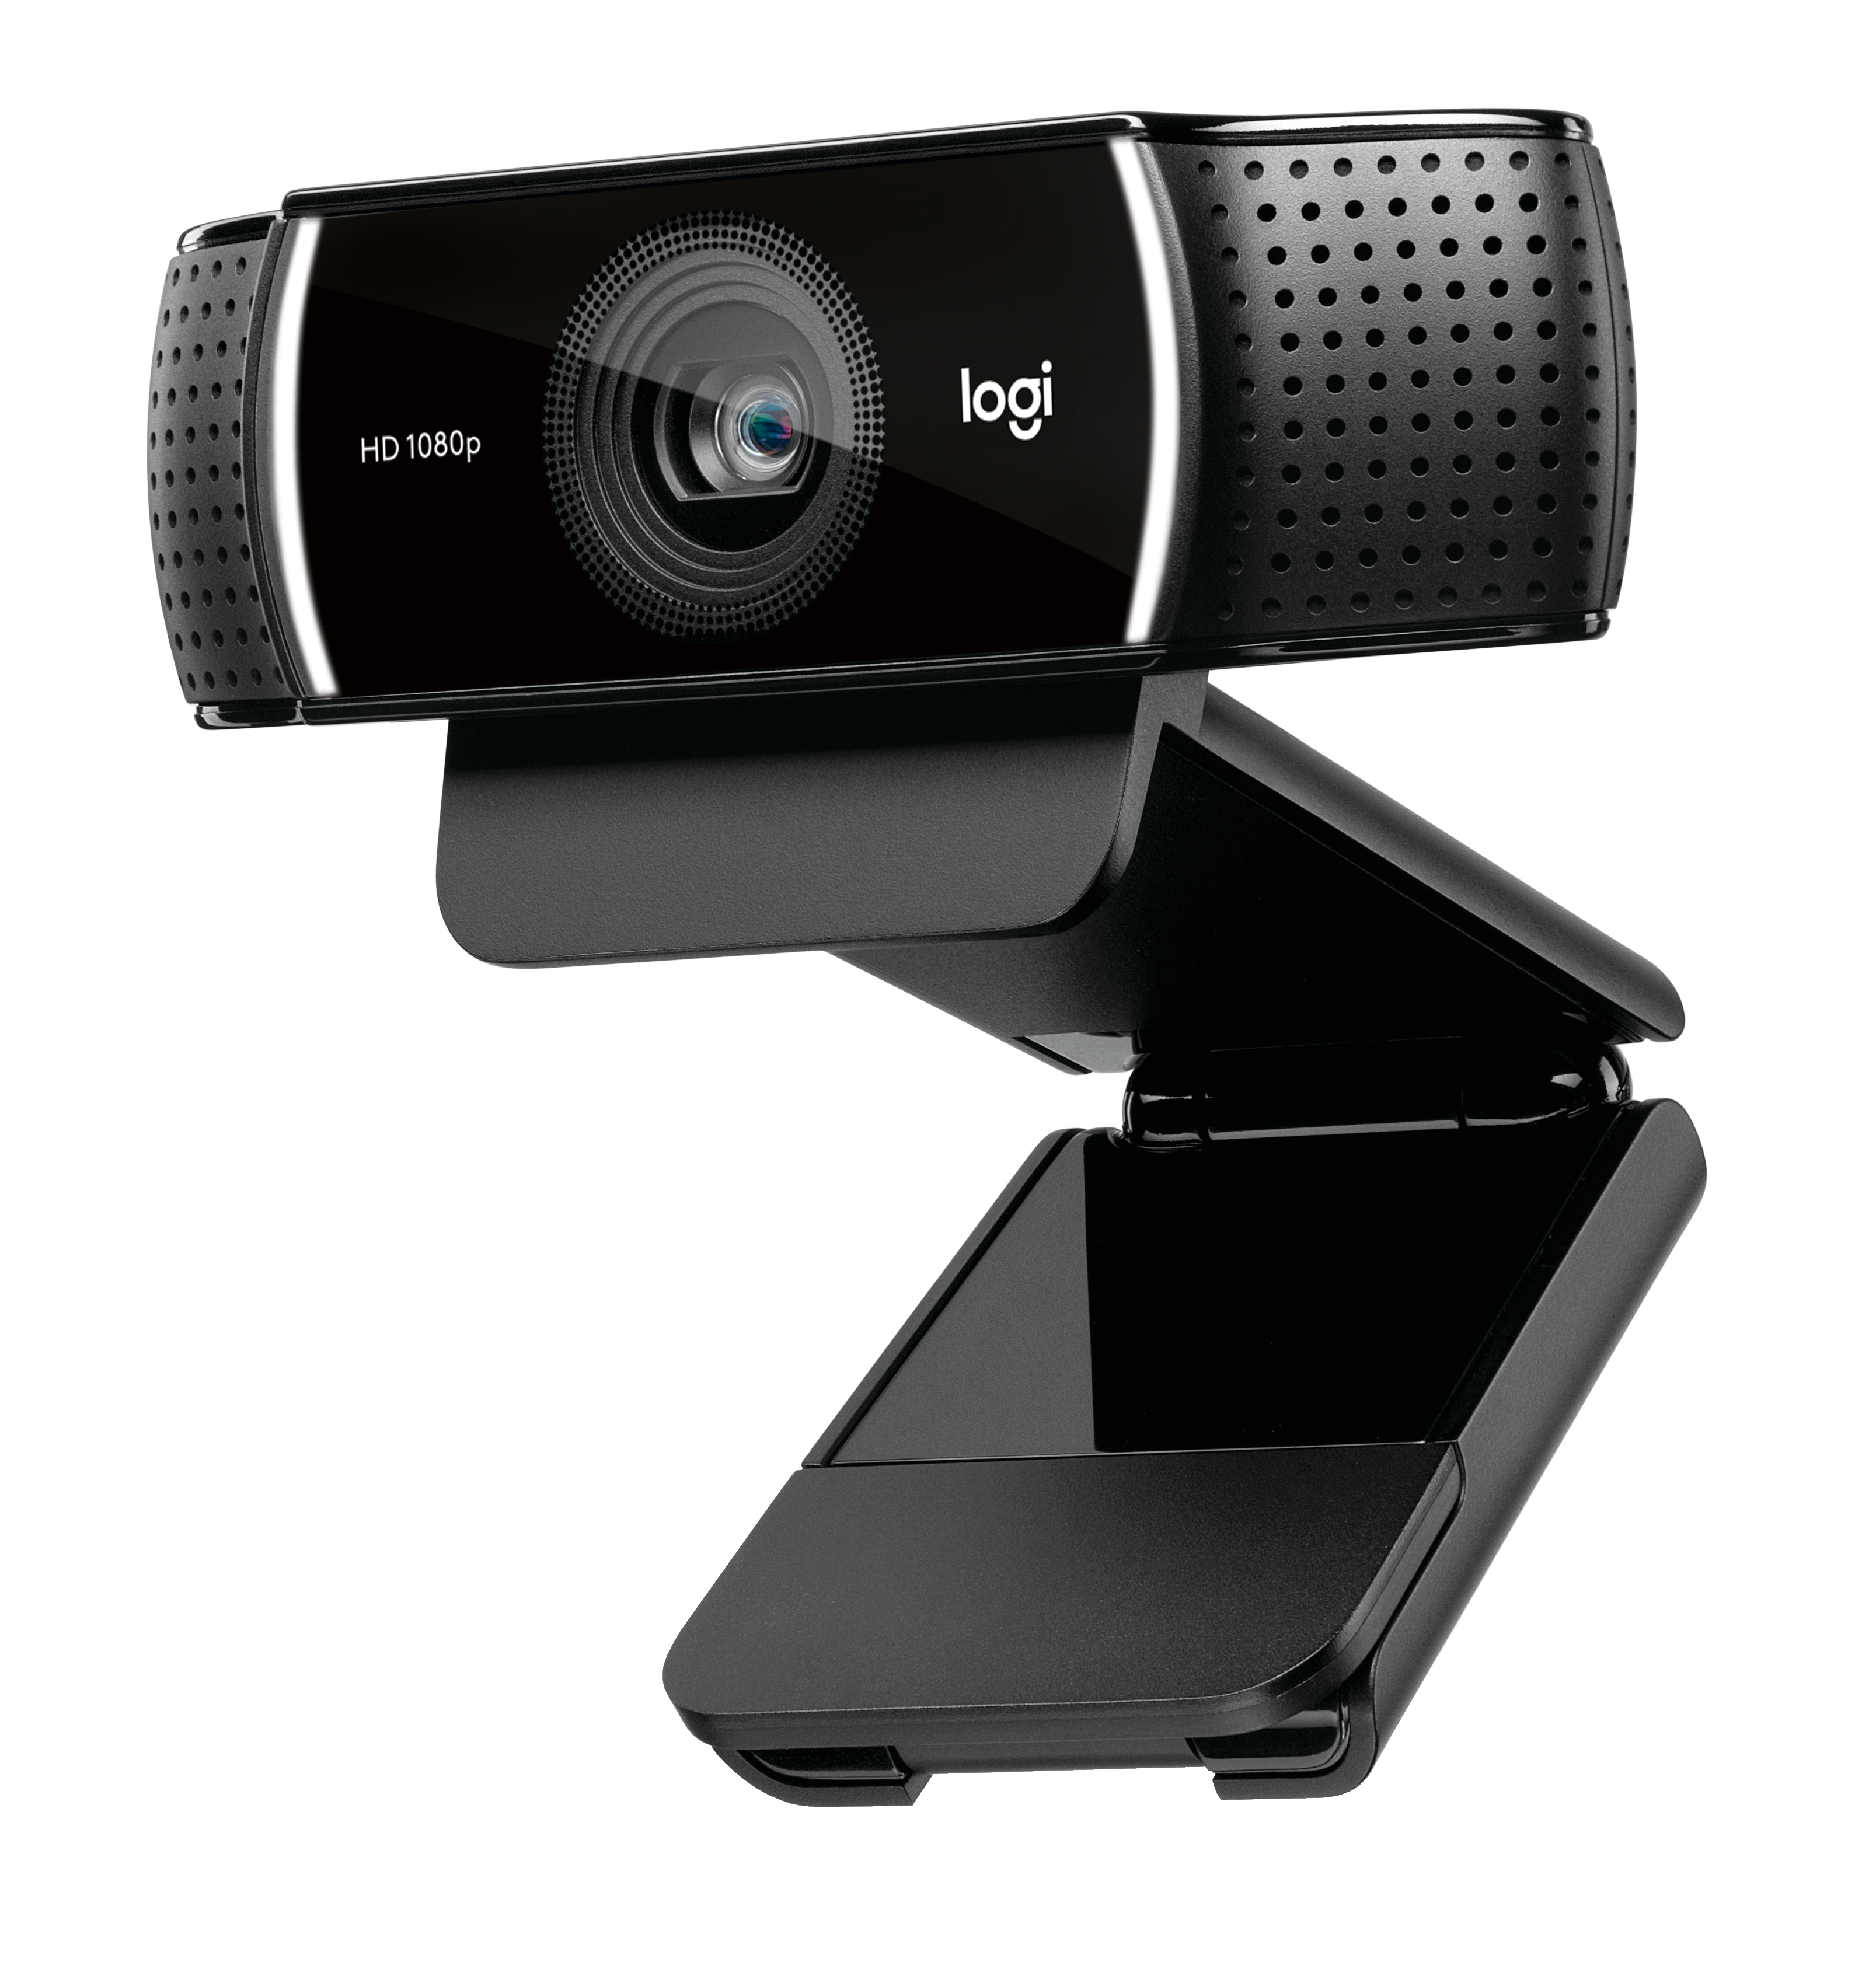 Logitech 1080p Pro Stream Webcam for HD Video Streaming and Recording at 1080p 30FPS - image 1 of 10